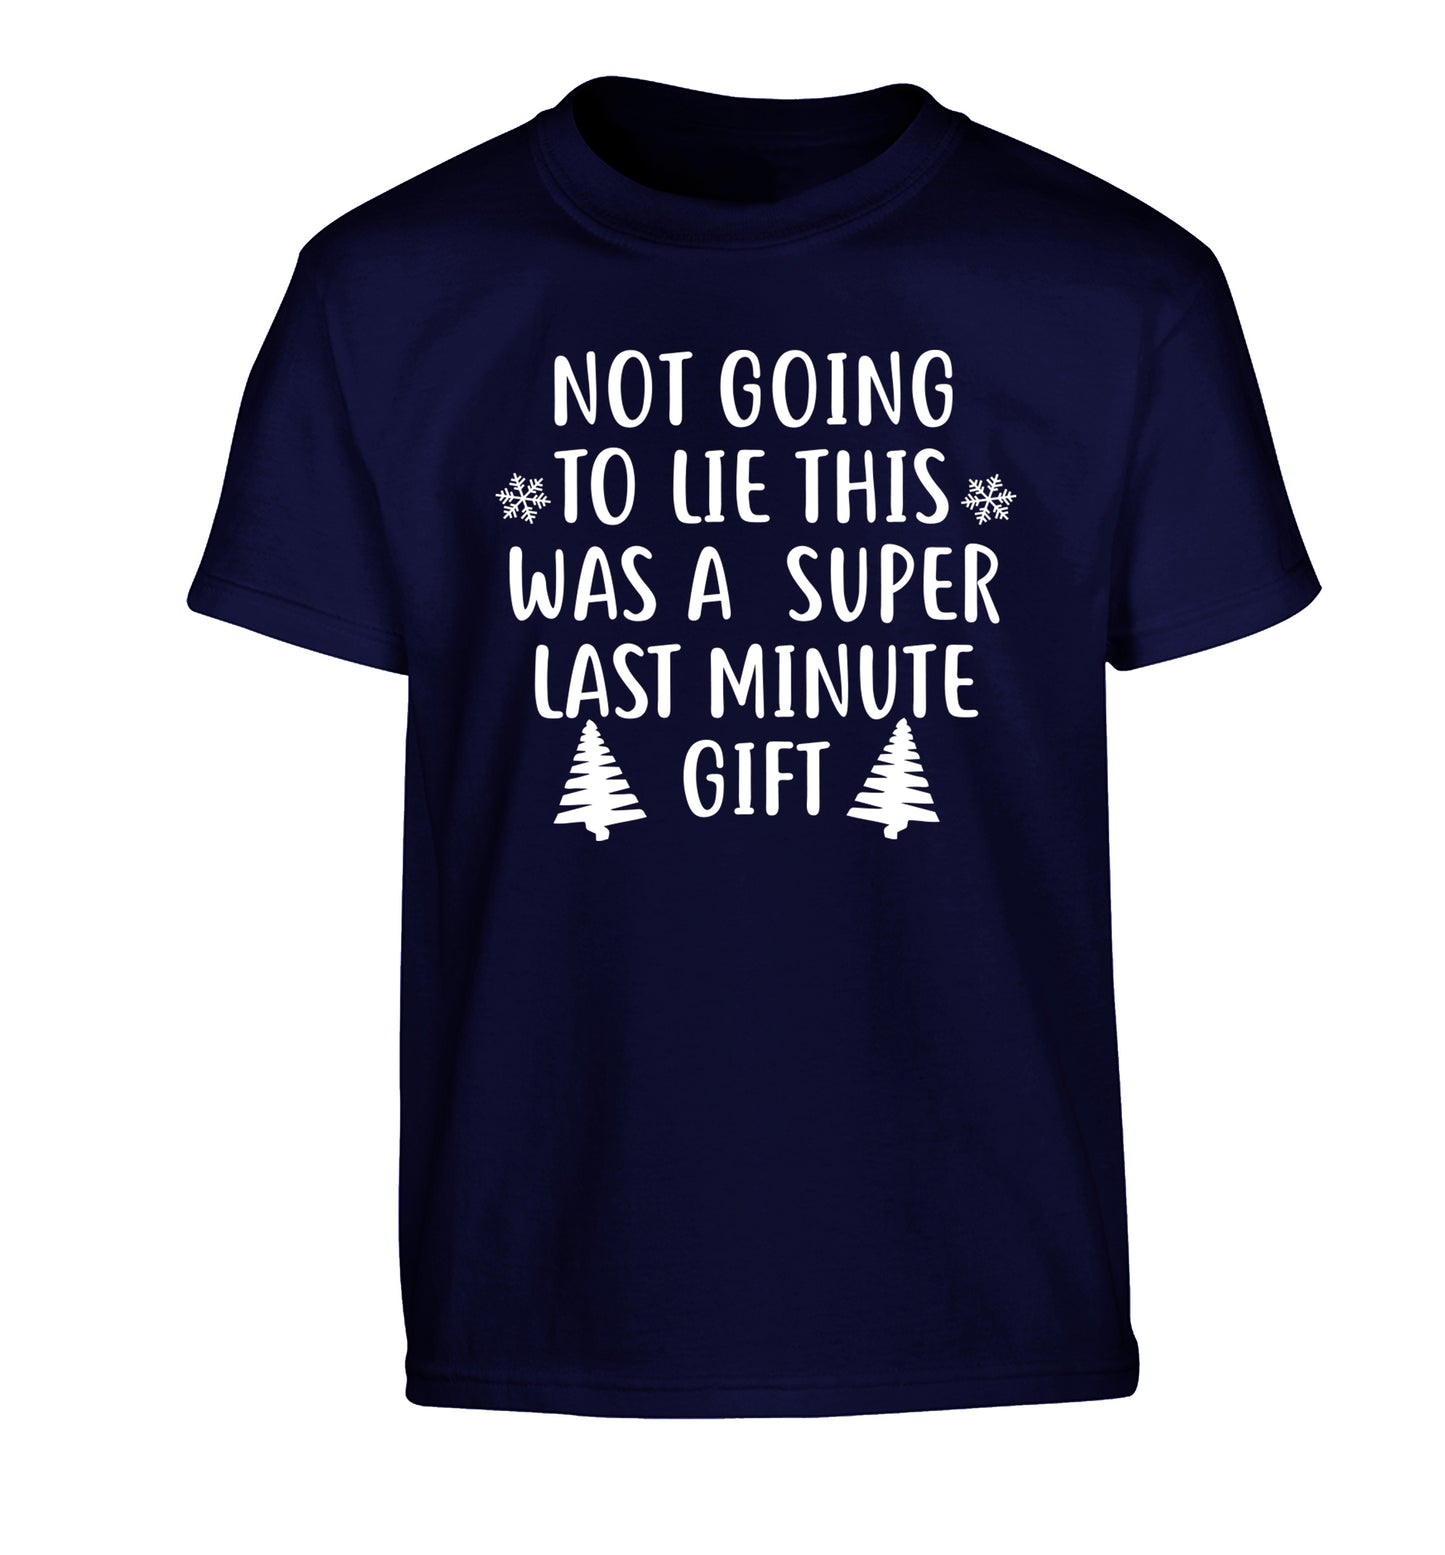 Not going to lie this was a super last minute gift Children's navy Tshirt 12-13 Years